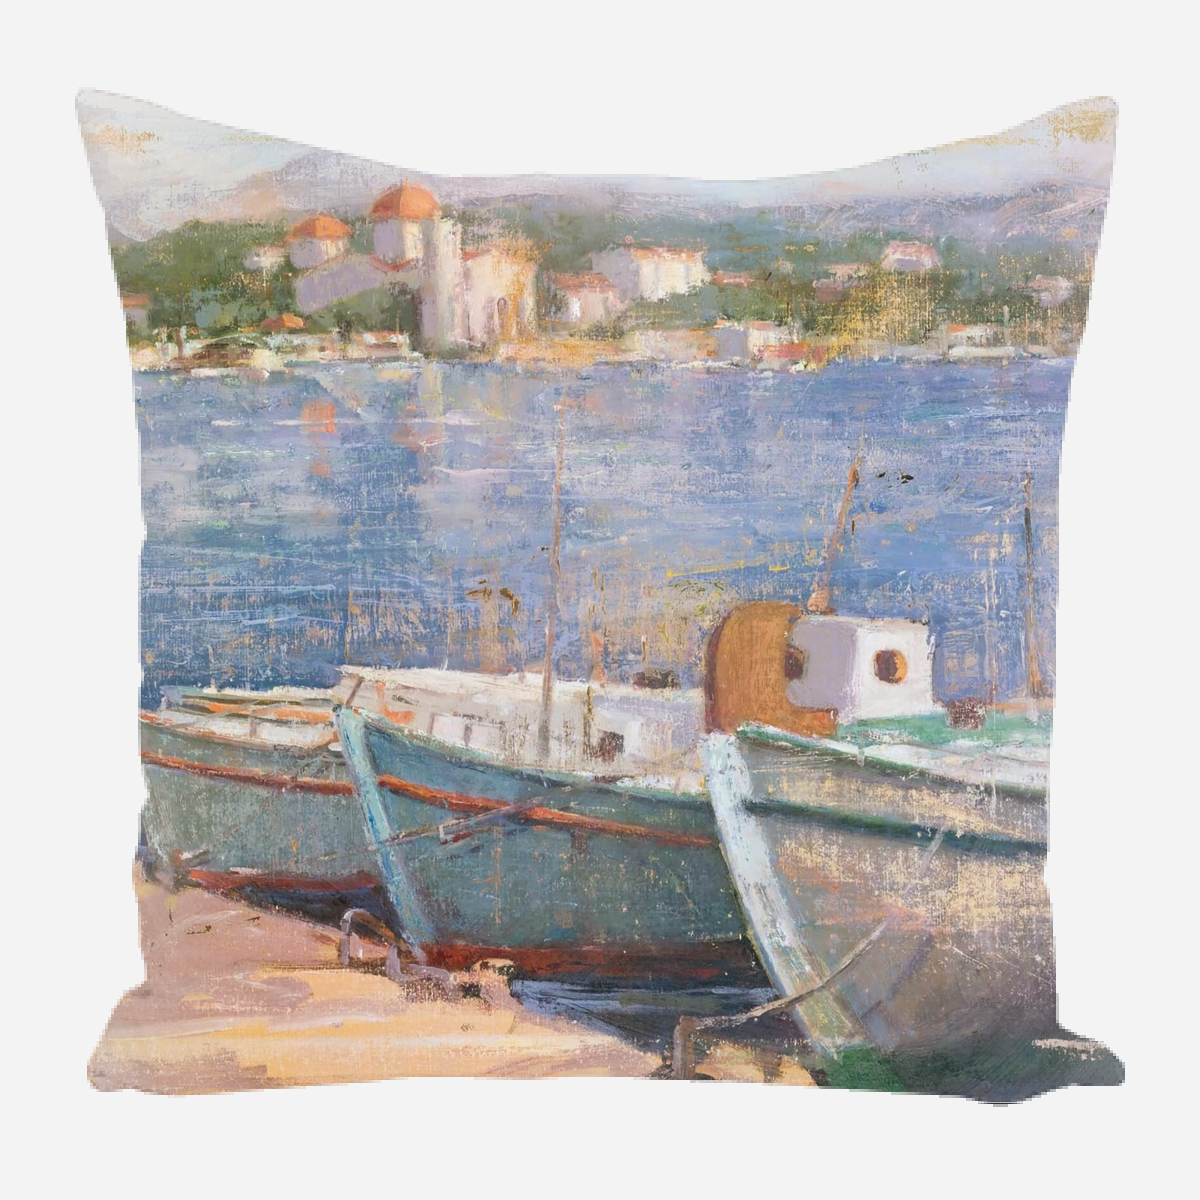 Vintage Boats Pillow